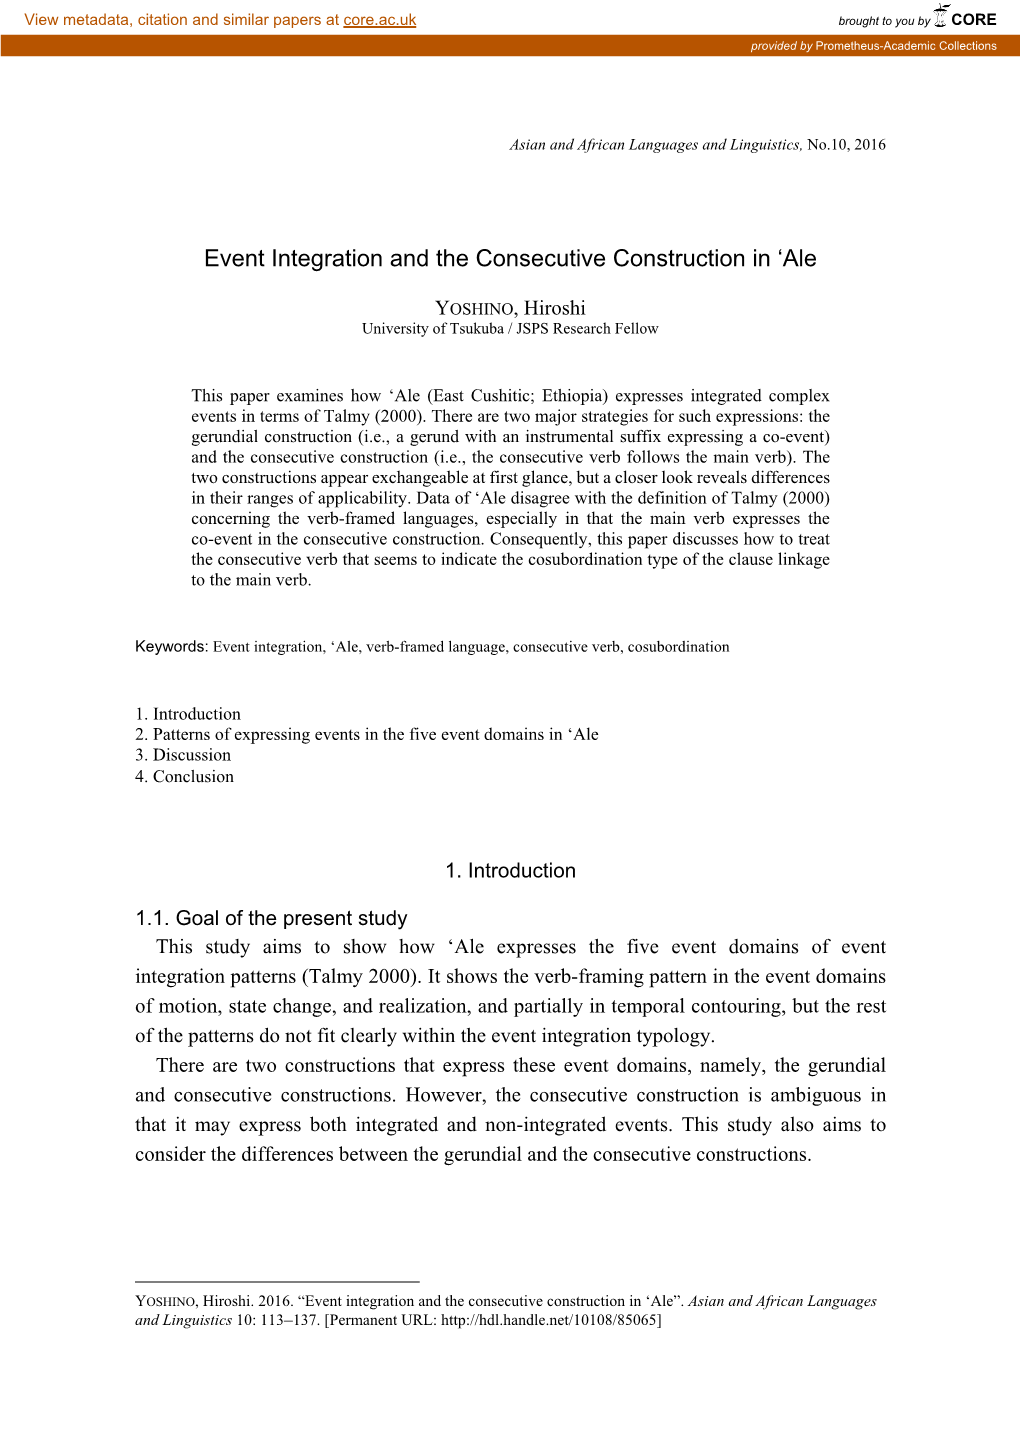 Event Integration and the Consecutive Construction in 'Ale